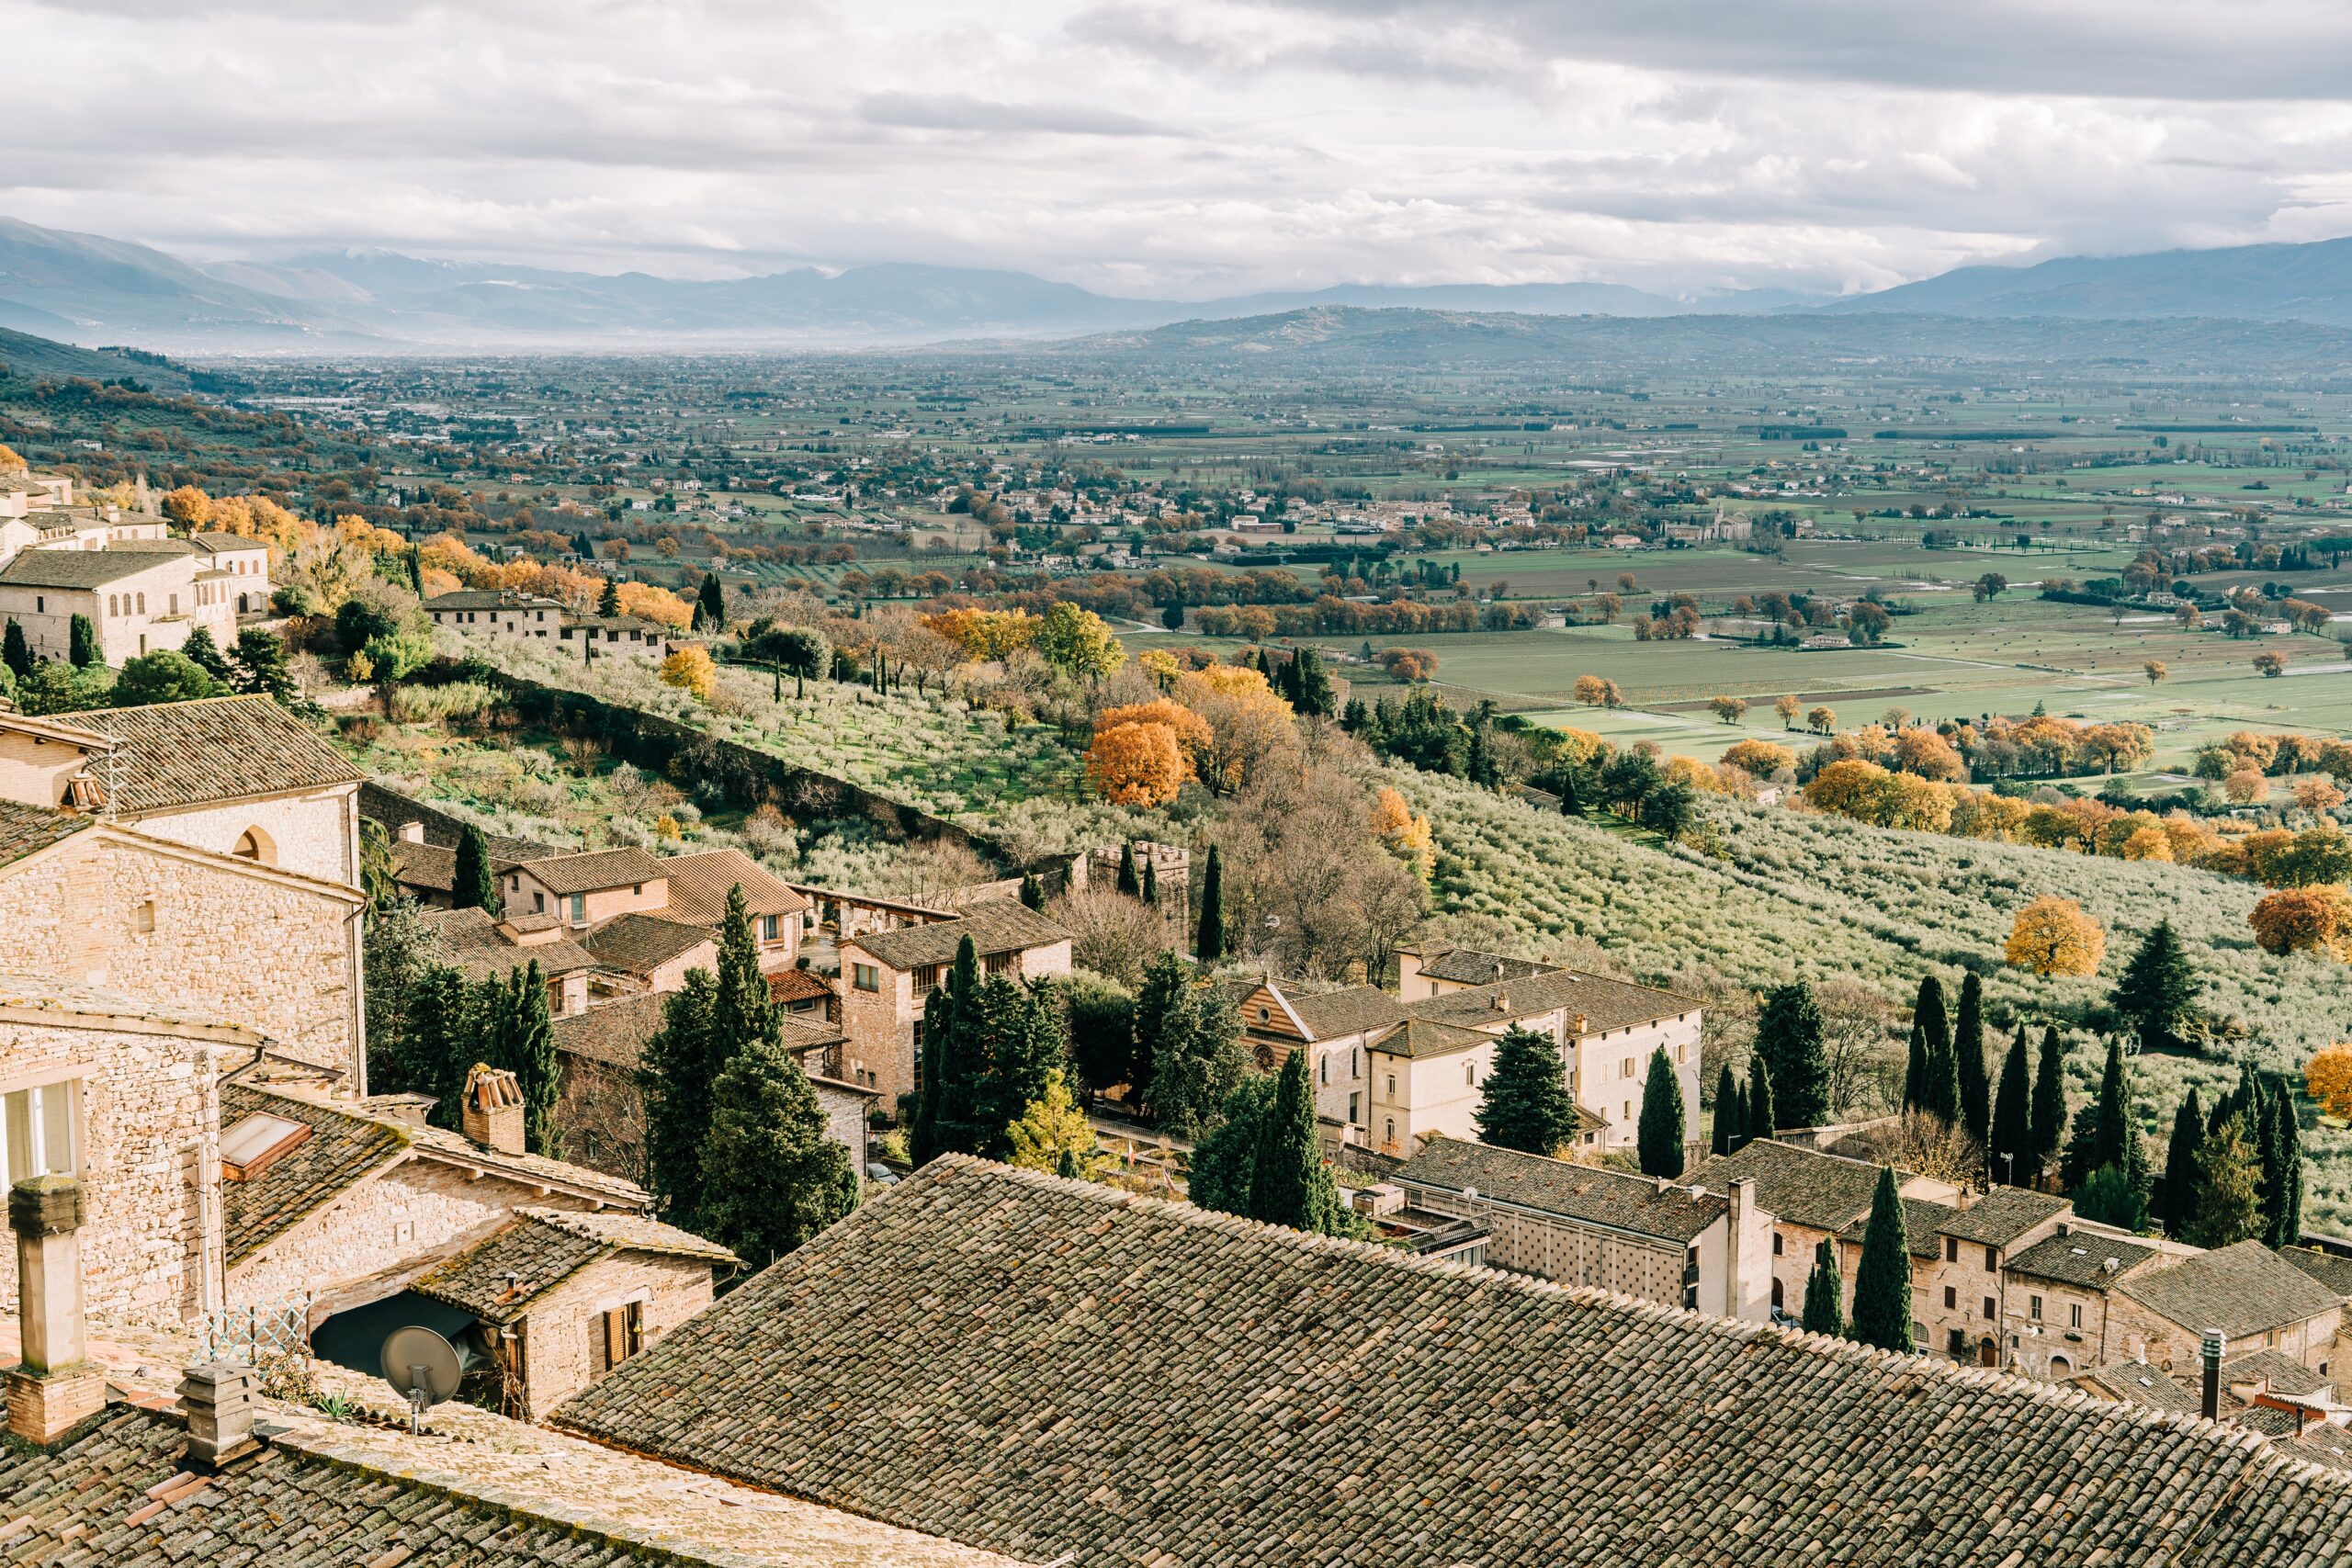 Umbria is a historic region of Italy's countryside. 
pictured: An overlooking view of a village of Umbria, Italy with expansive green land  